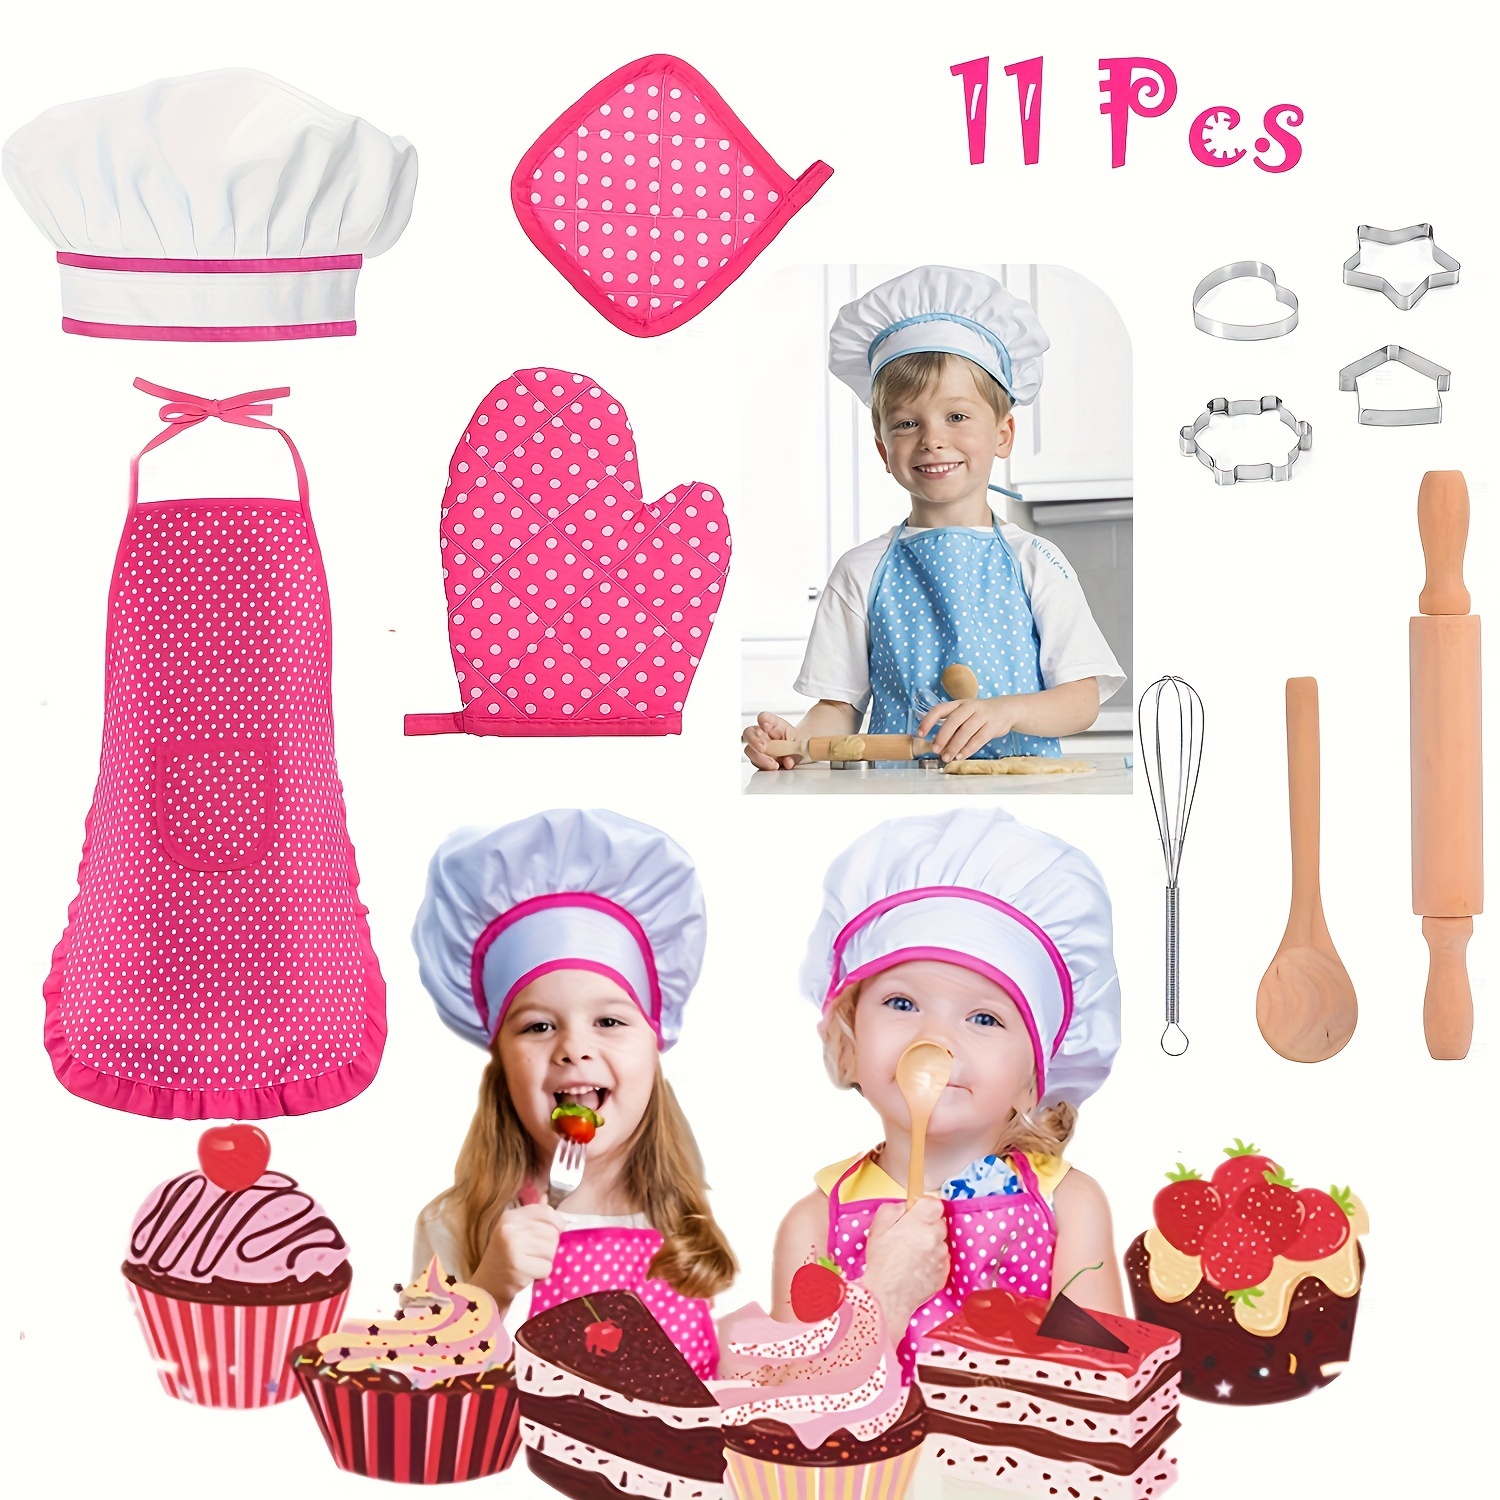 Kids Cooking & Baking Set with Storage Case, Montessori Kitchen Tools Set  for Toddlers with Chef Hat, Apron,Toddler Safe Knife, Mold & More, Real